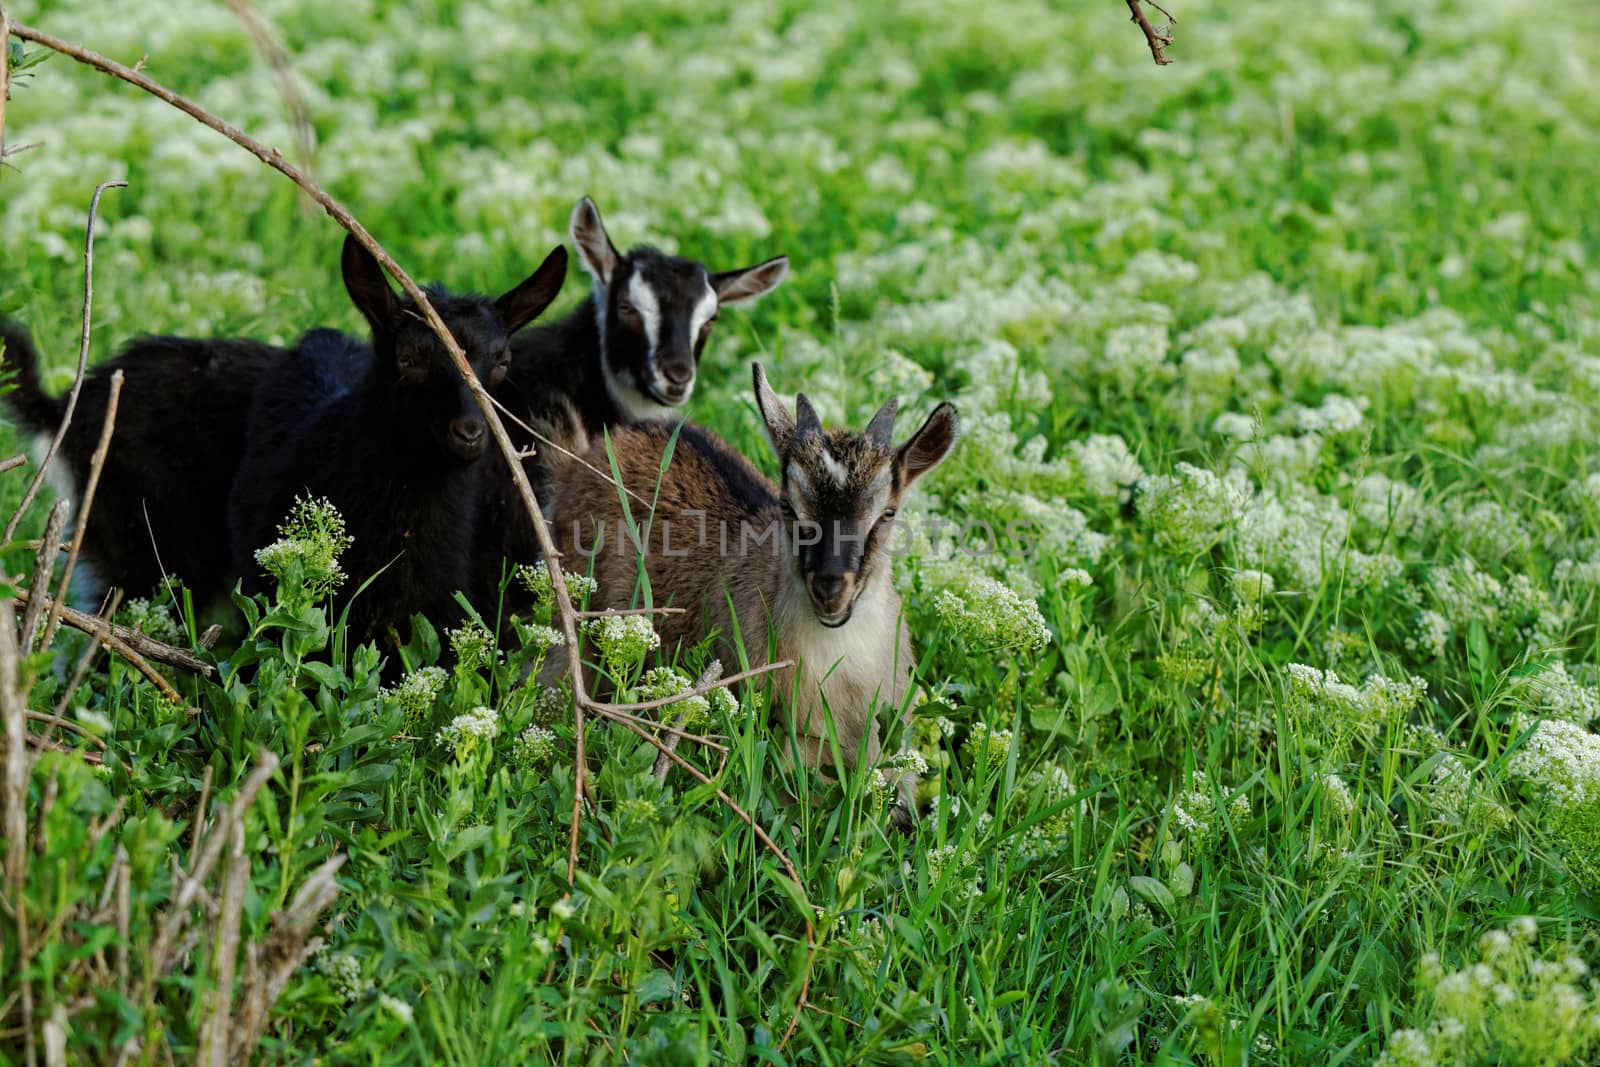 Goats grazing in the meadow